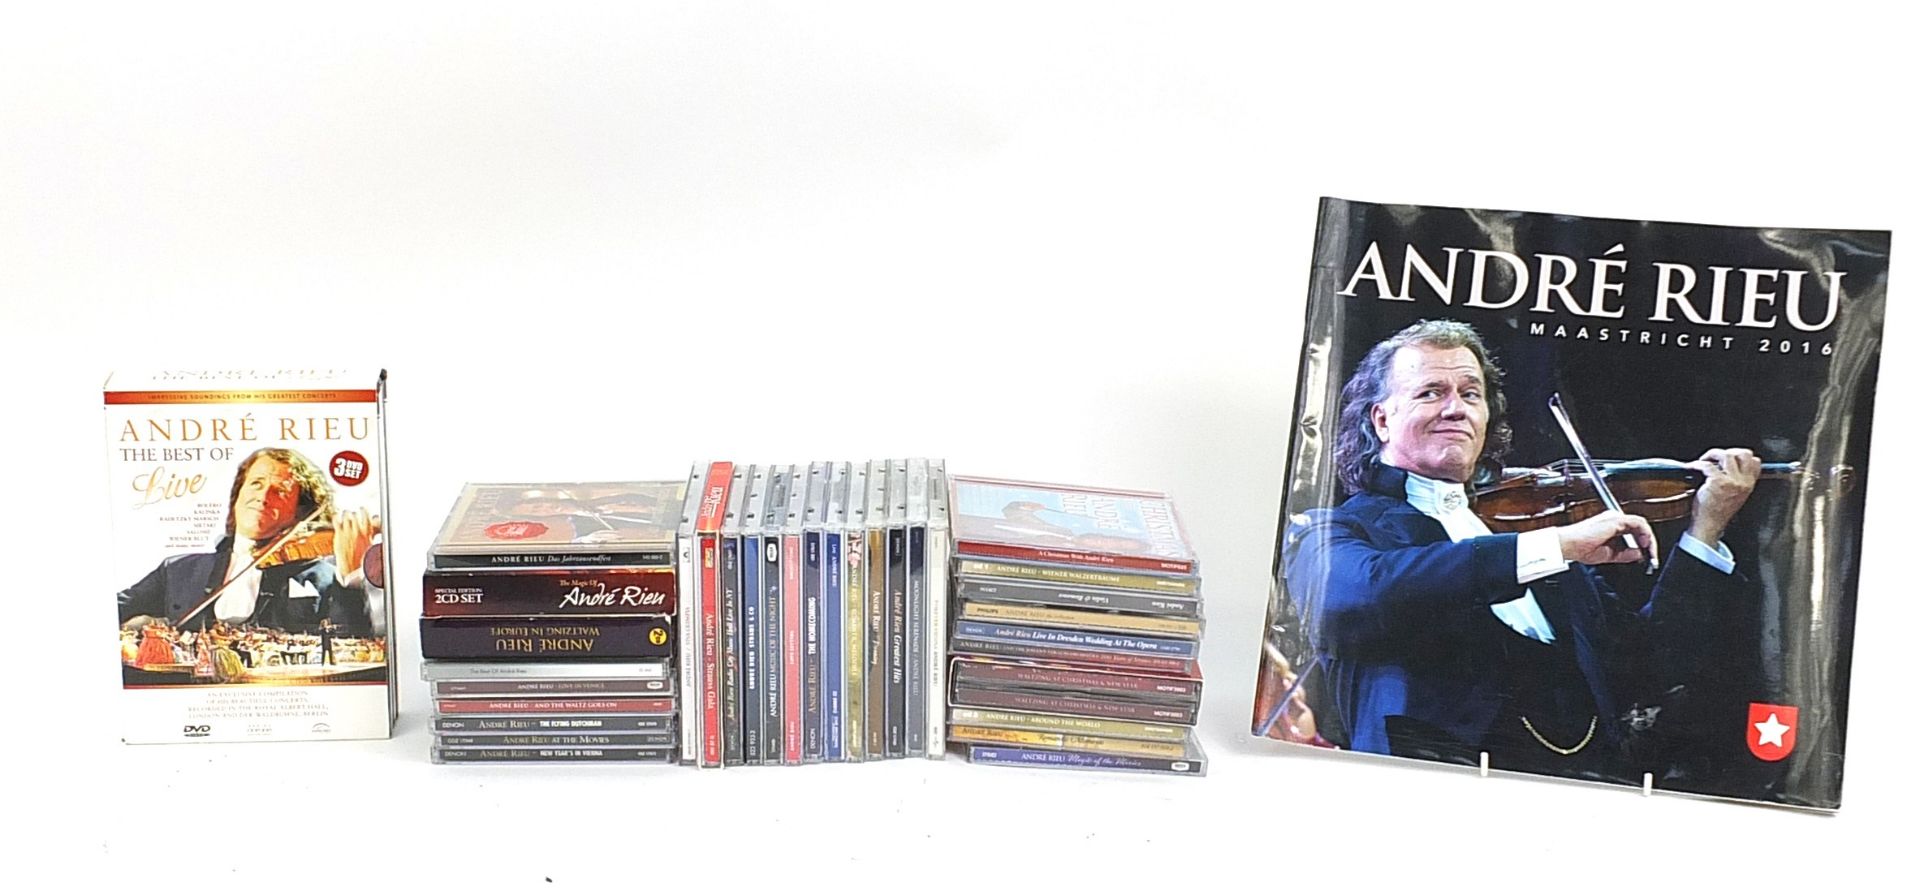 Selection of the celebrity violinist Andre Rieu CD's, DVDs and a Maastricht 2016 programme